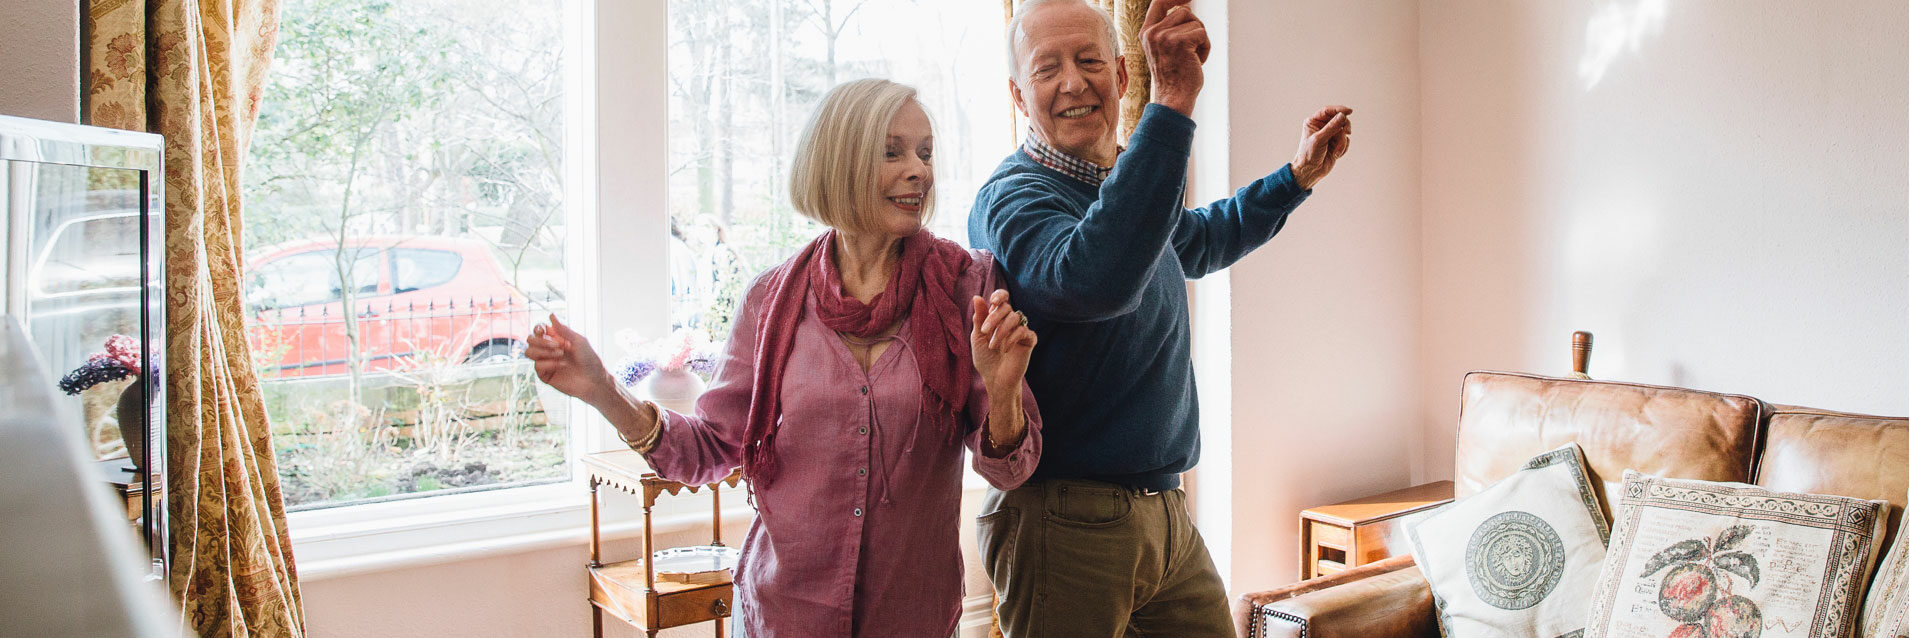 An elderly couple dancing to music in their home